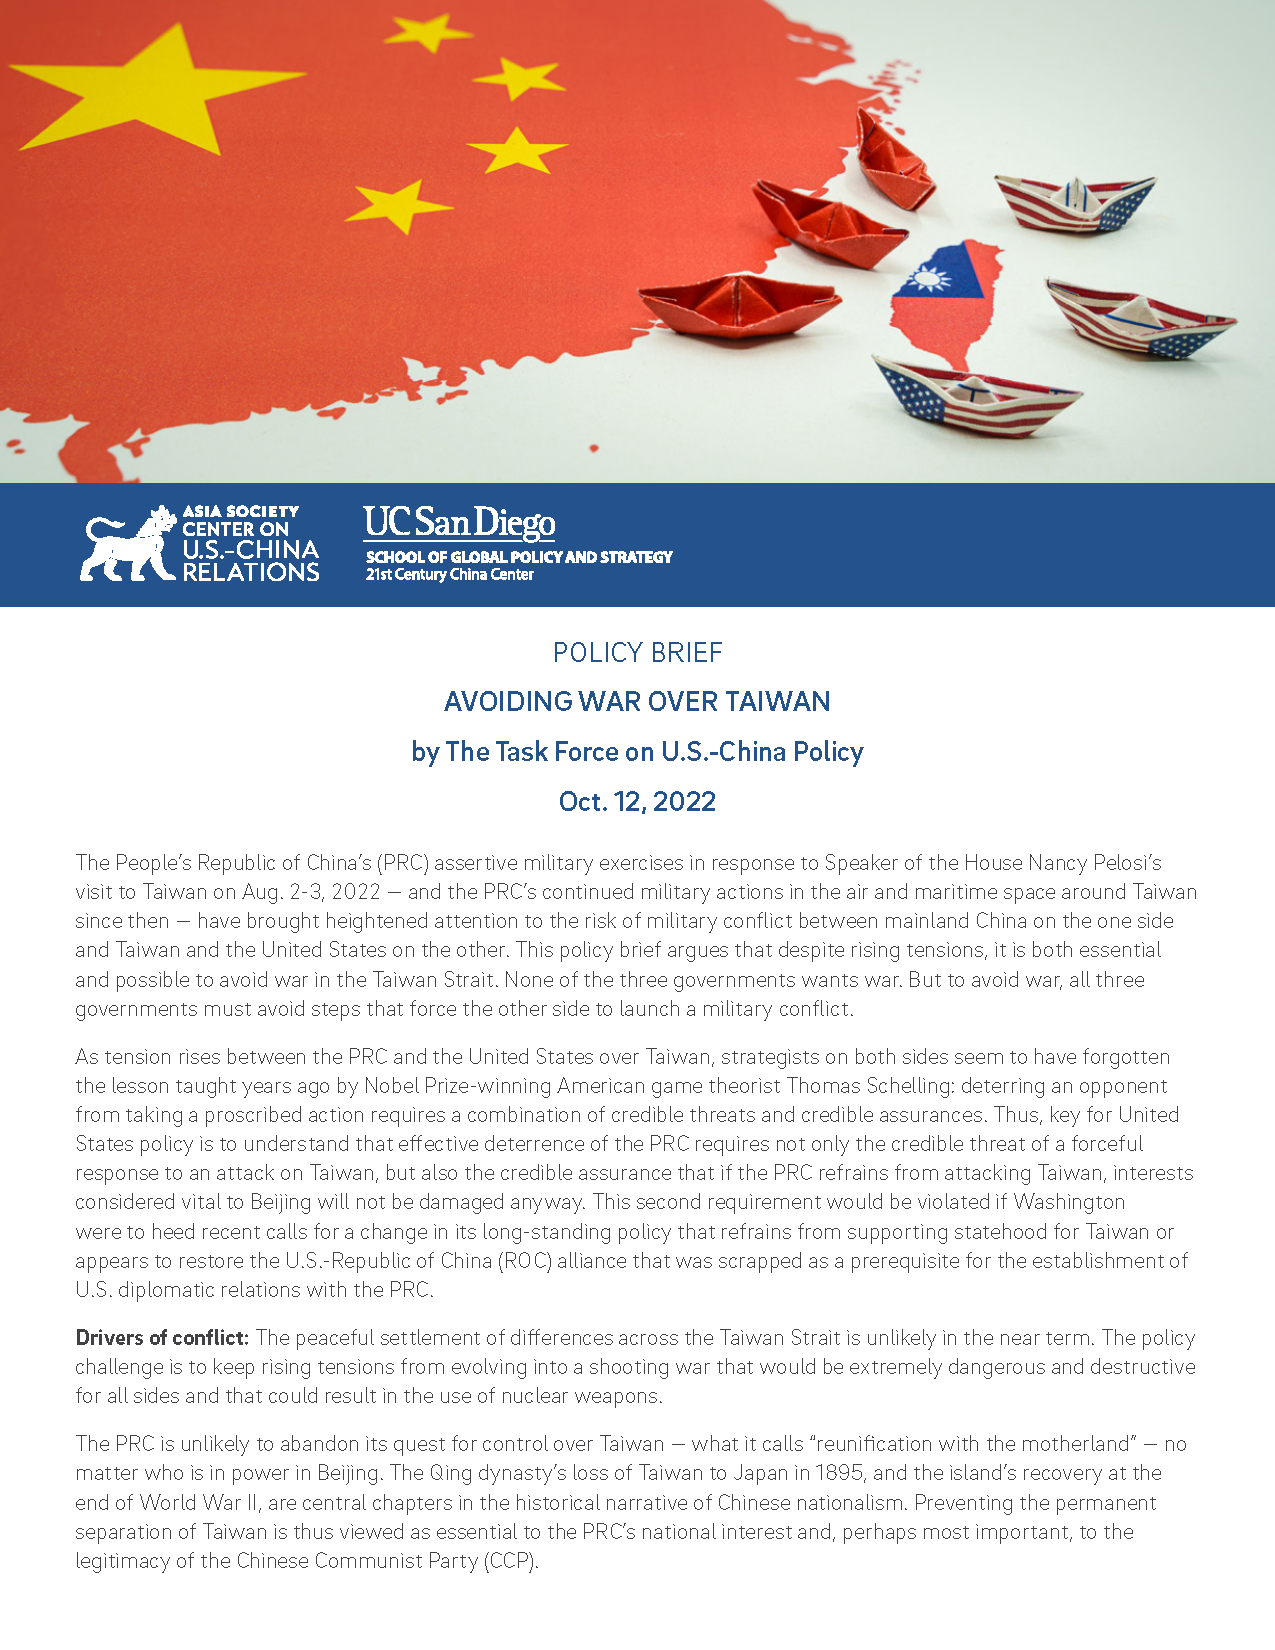 Cover report for Taiwan policy brief